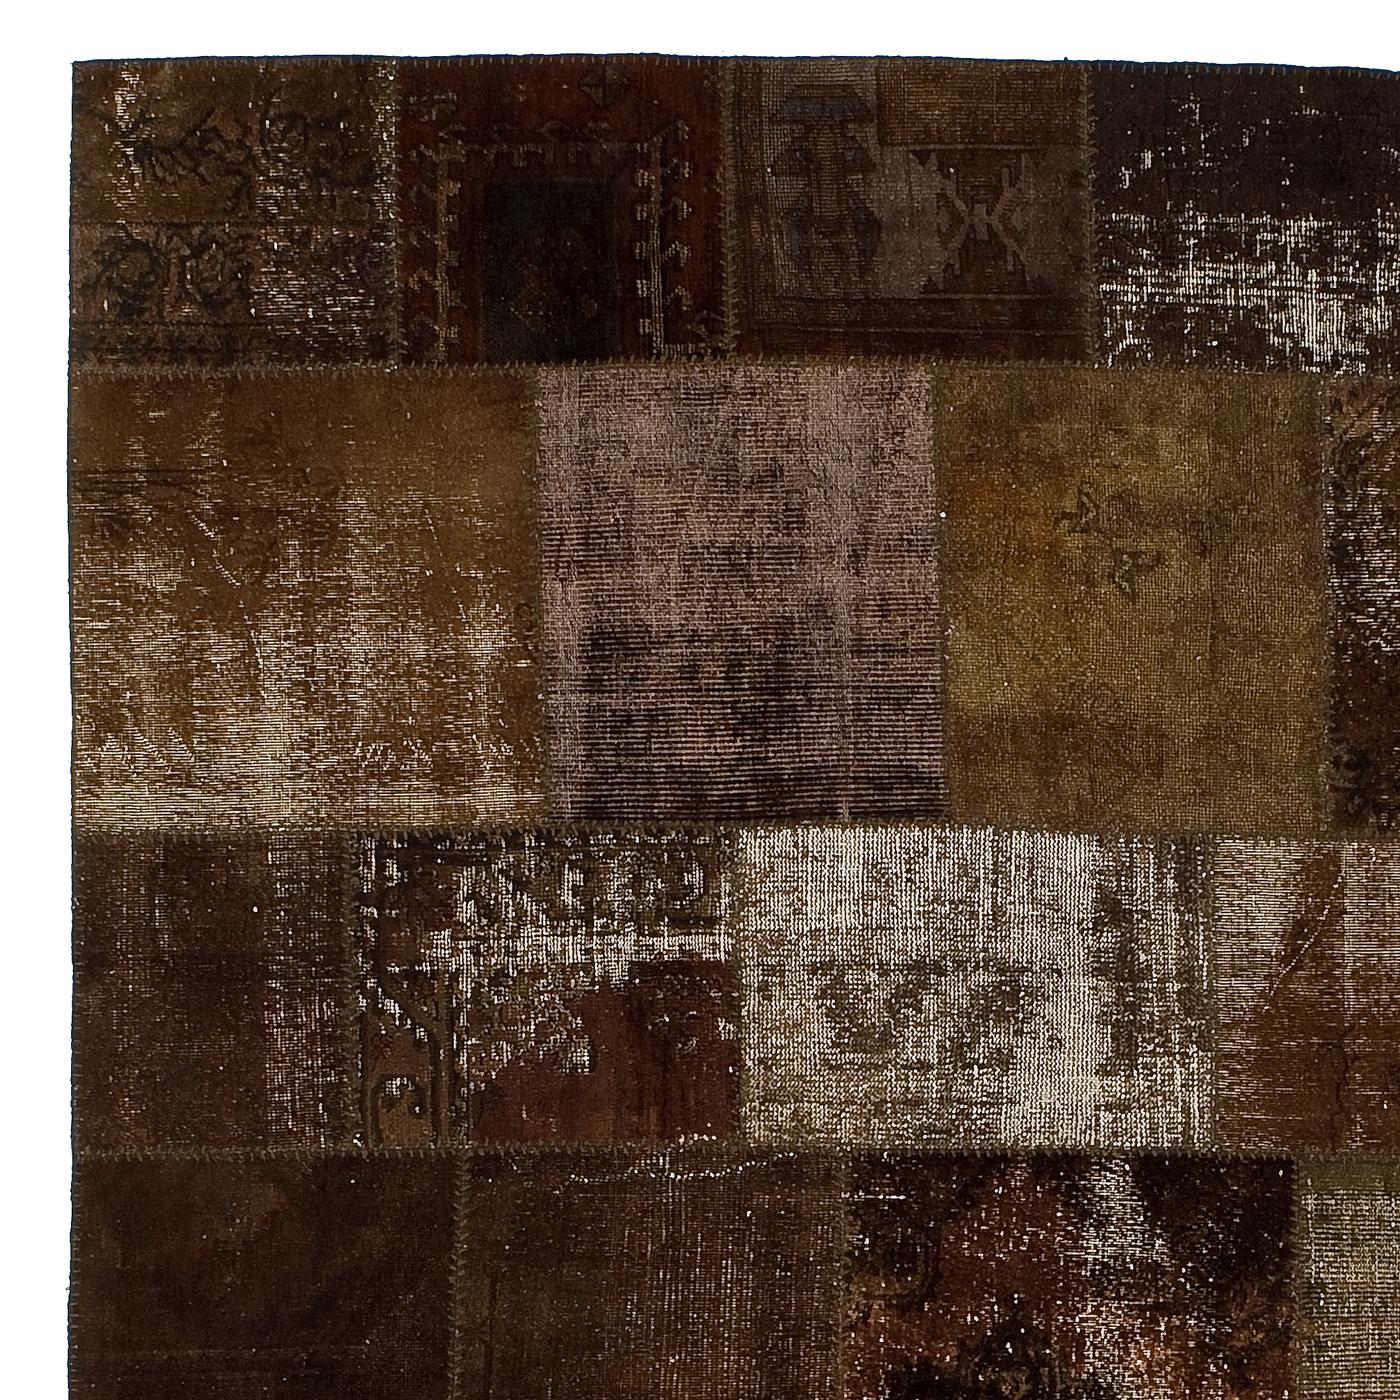 Elegant and sophisticated, this carpet is made of different pieces of vintage rugs that are dyed with monochromatic vegetable dyes and sewn together by hand using precious yarns to create a piece that links traditional artisanal craftsmanship with a